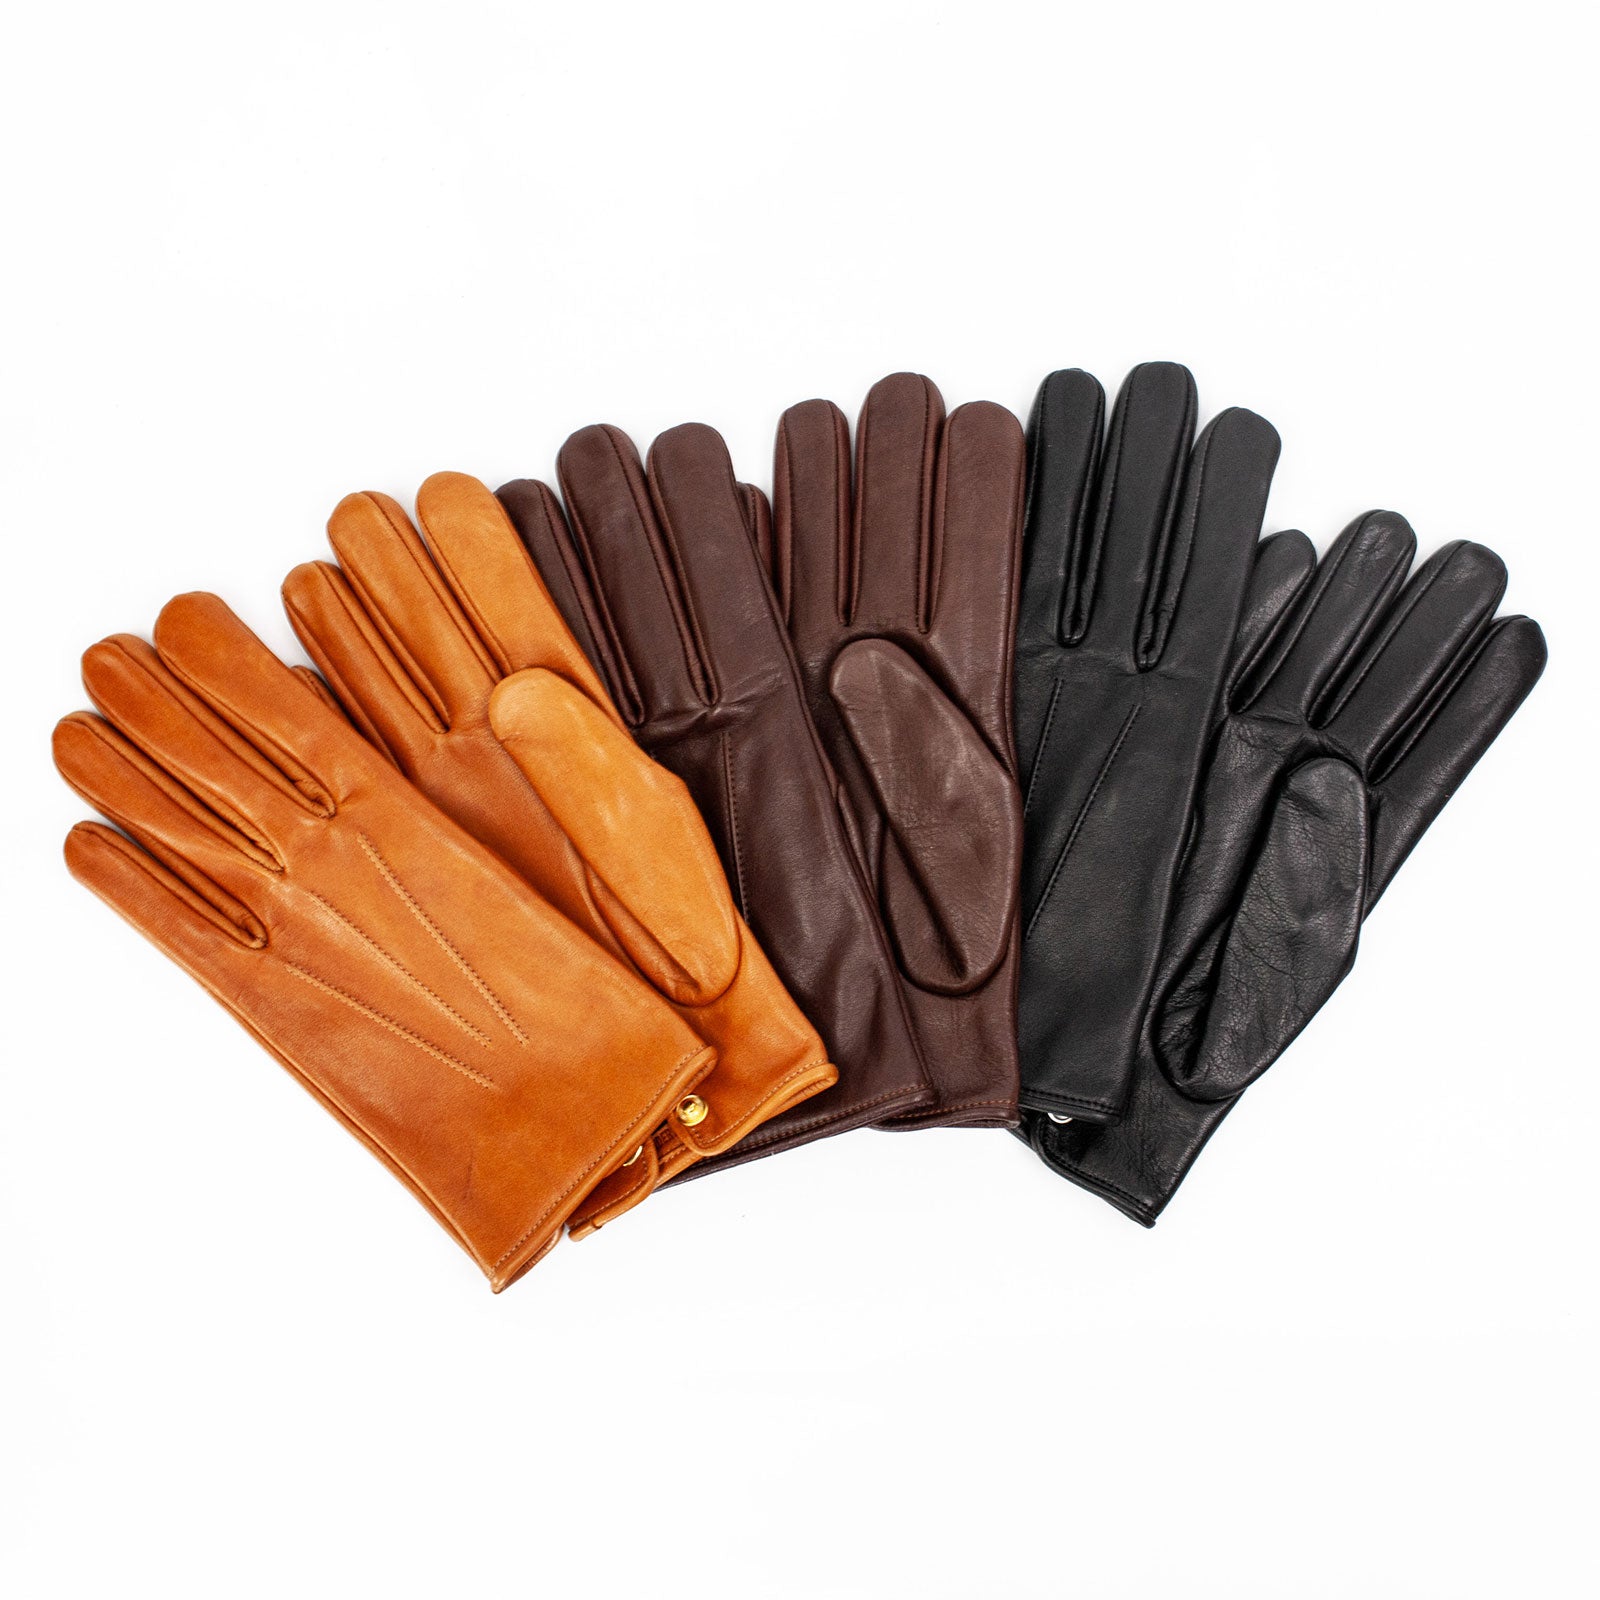 WONDER BAGGAGE-ワンダーバゲージ- WASHABLE LEATHER GLOVES 